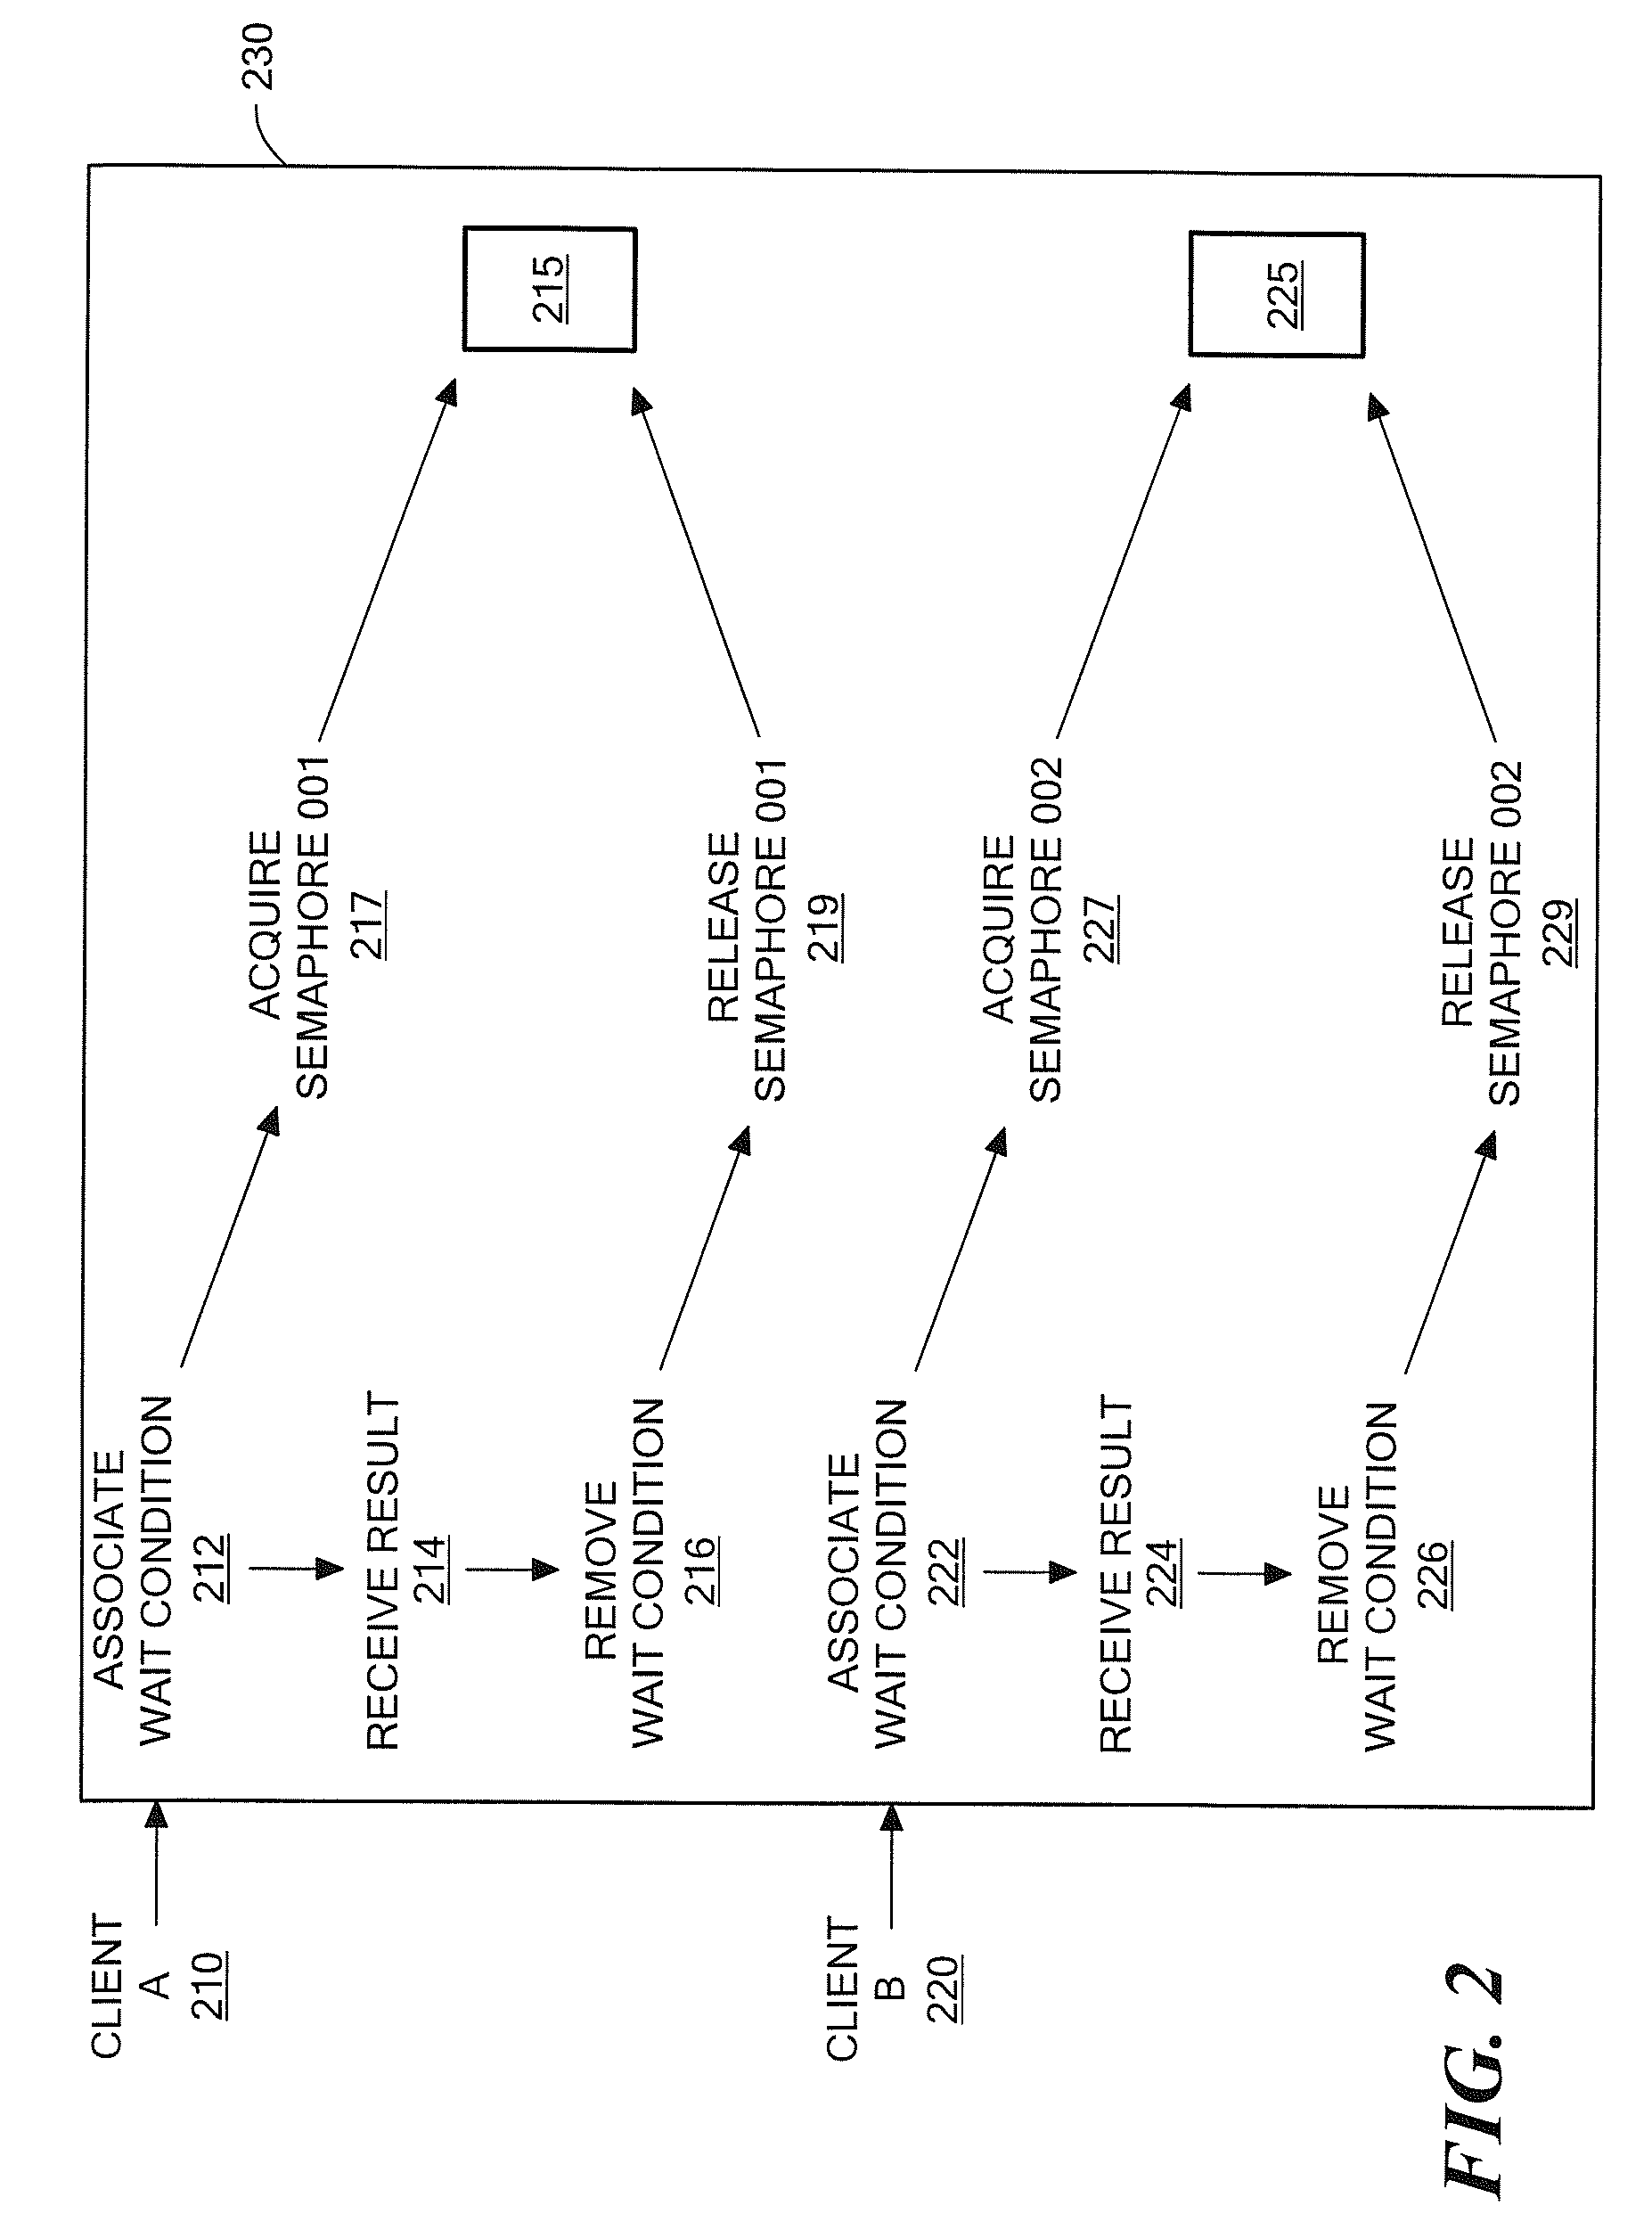 Method and apparatus for providing a synchronous interface for an asynchronous service